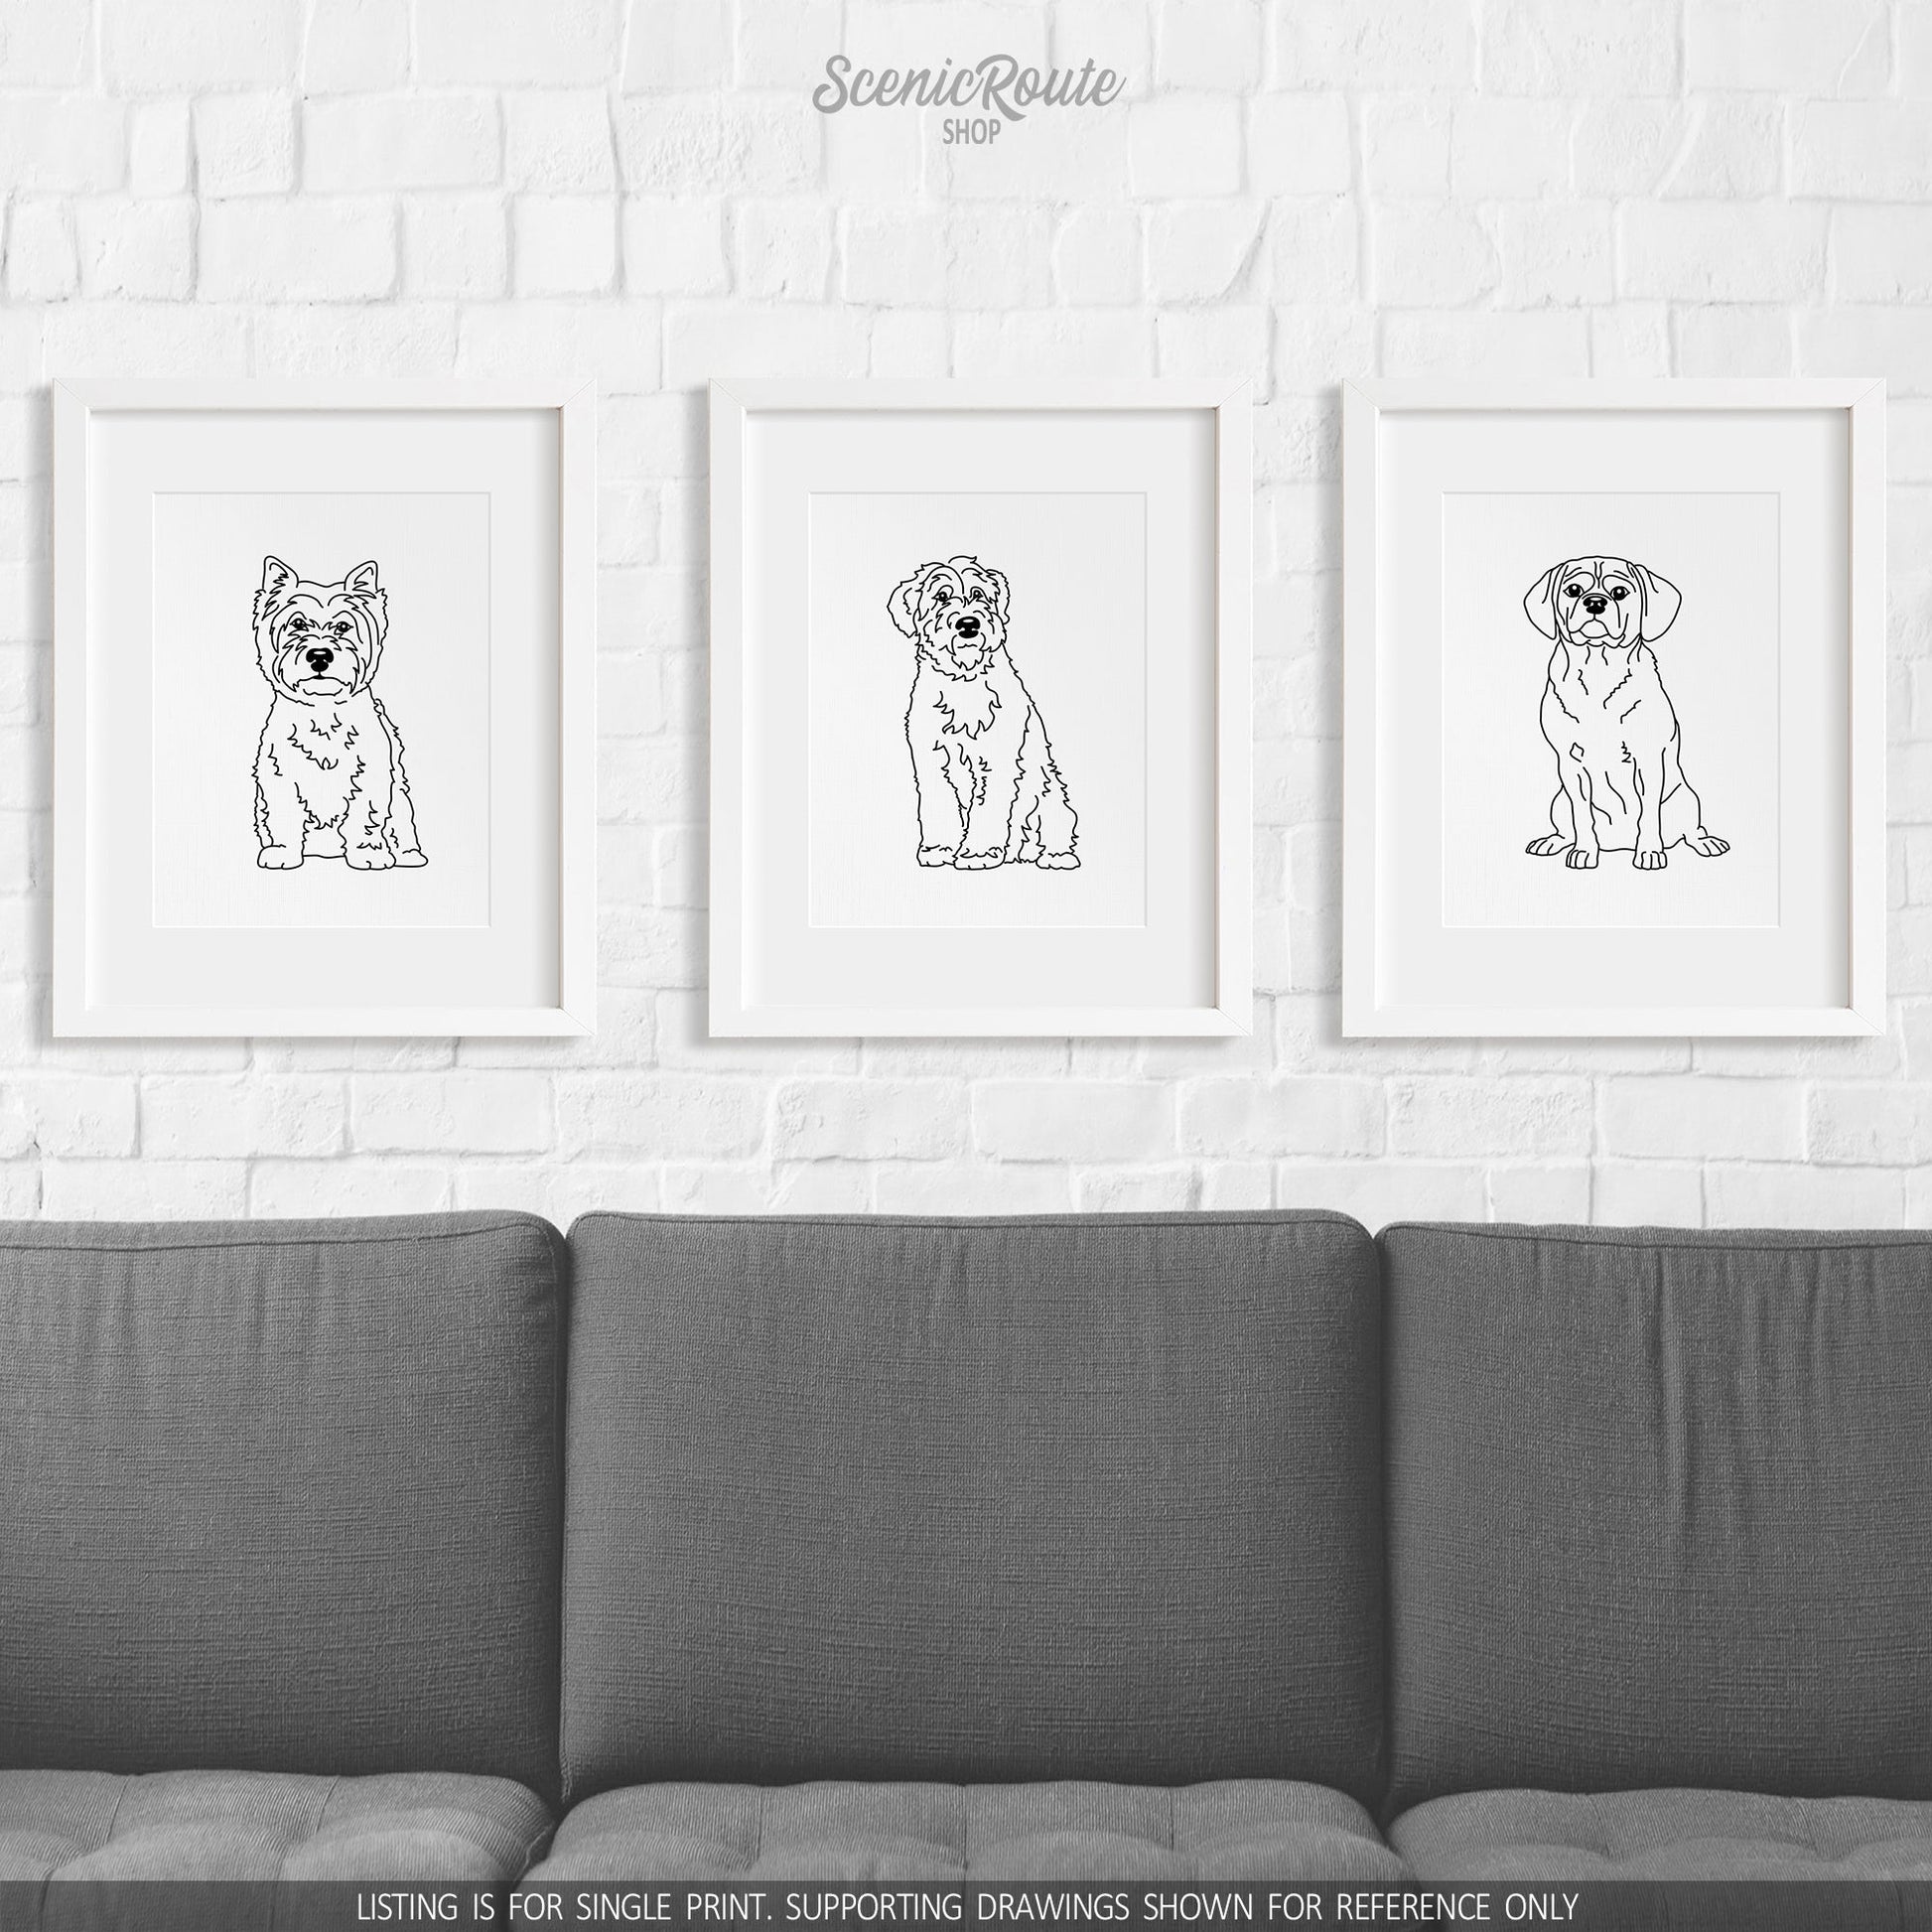 A group of three framed drawings on a white brick wall above a couch. The line art drawings include a West Highland Terrier dog, a Wheaten Terrier dog, and a Puggle dog